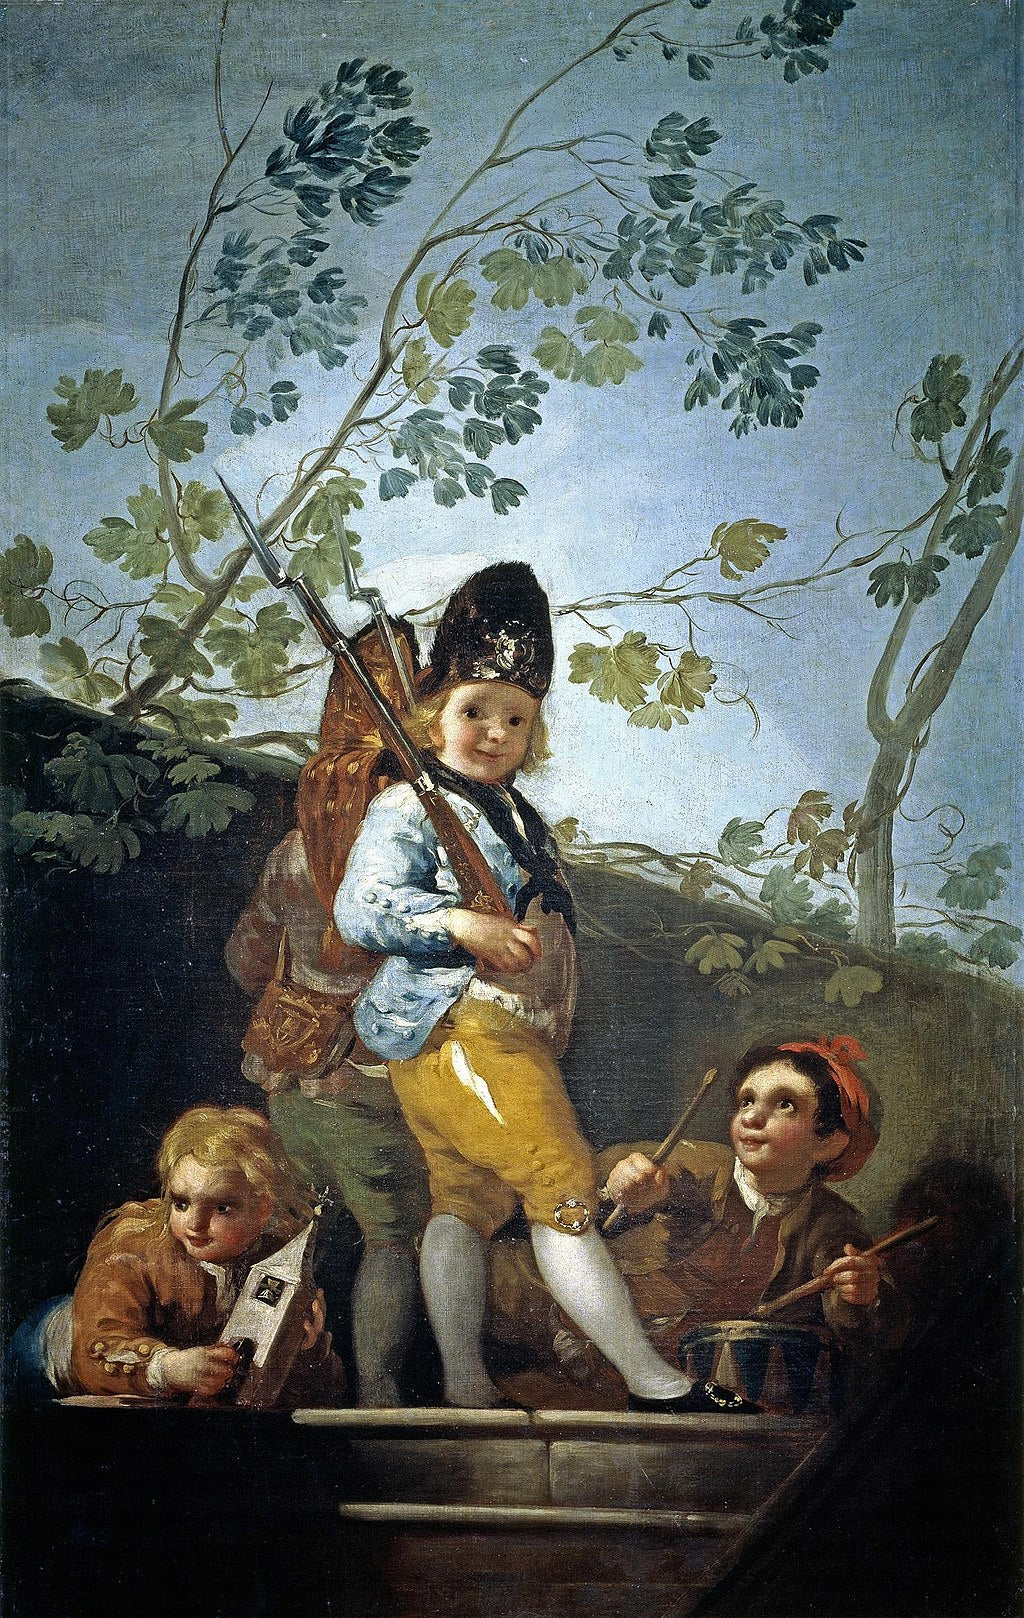 Boys playing soldiers by Francisco Goya, Reproduction for Sale